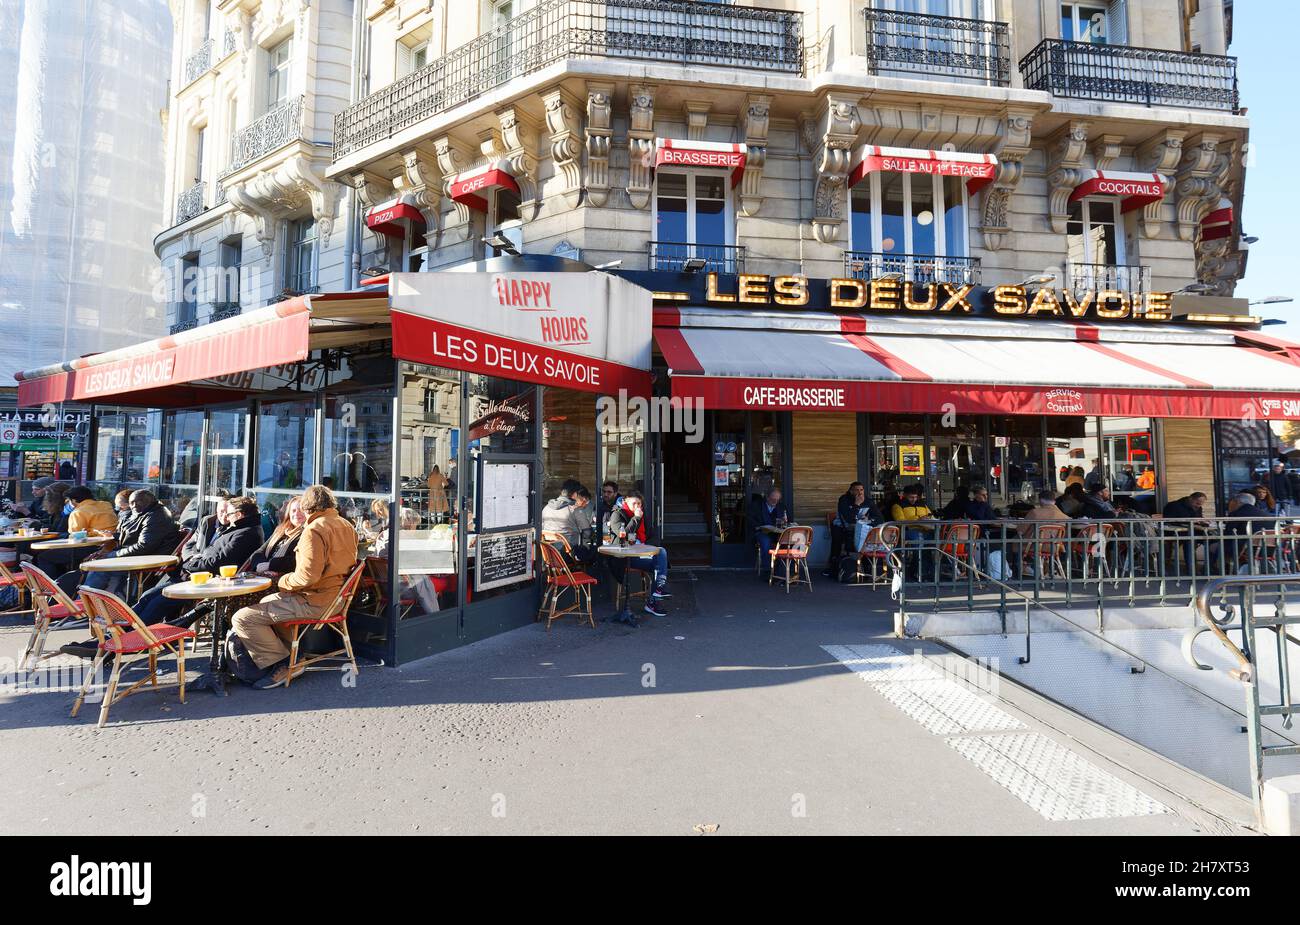 Le Deux Savoie is traditional French restaurant located near the Gare de Lyon station in Paris, France . Stock Photo